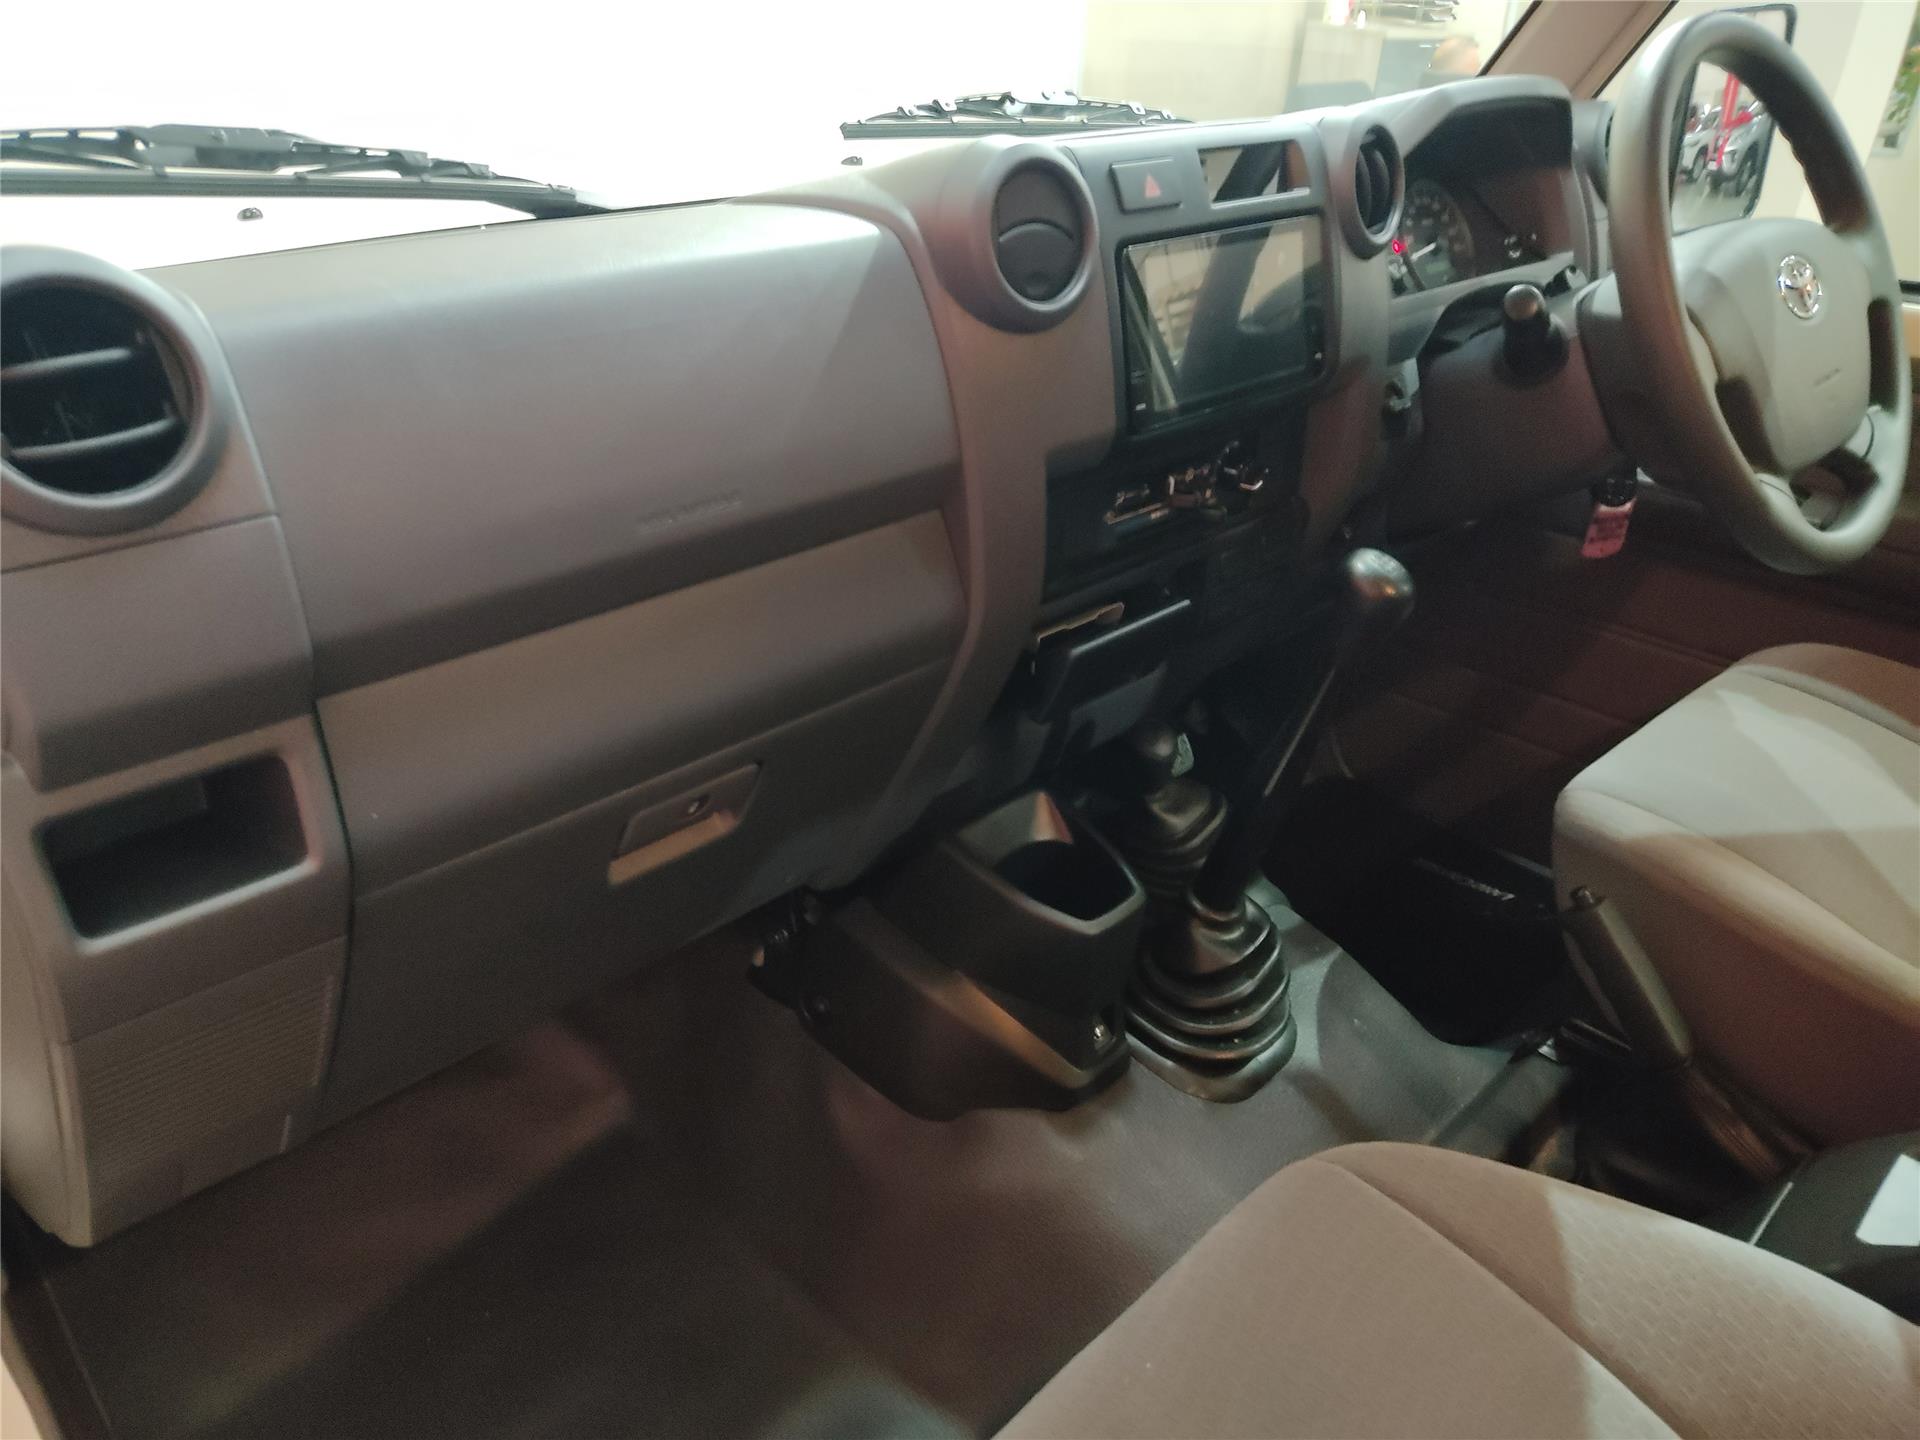 Manual Toyota Land Cruiser 79 2022 for sale